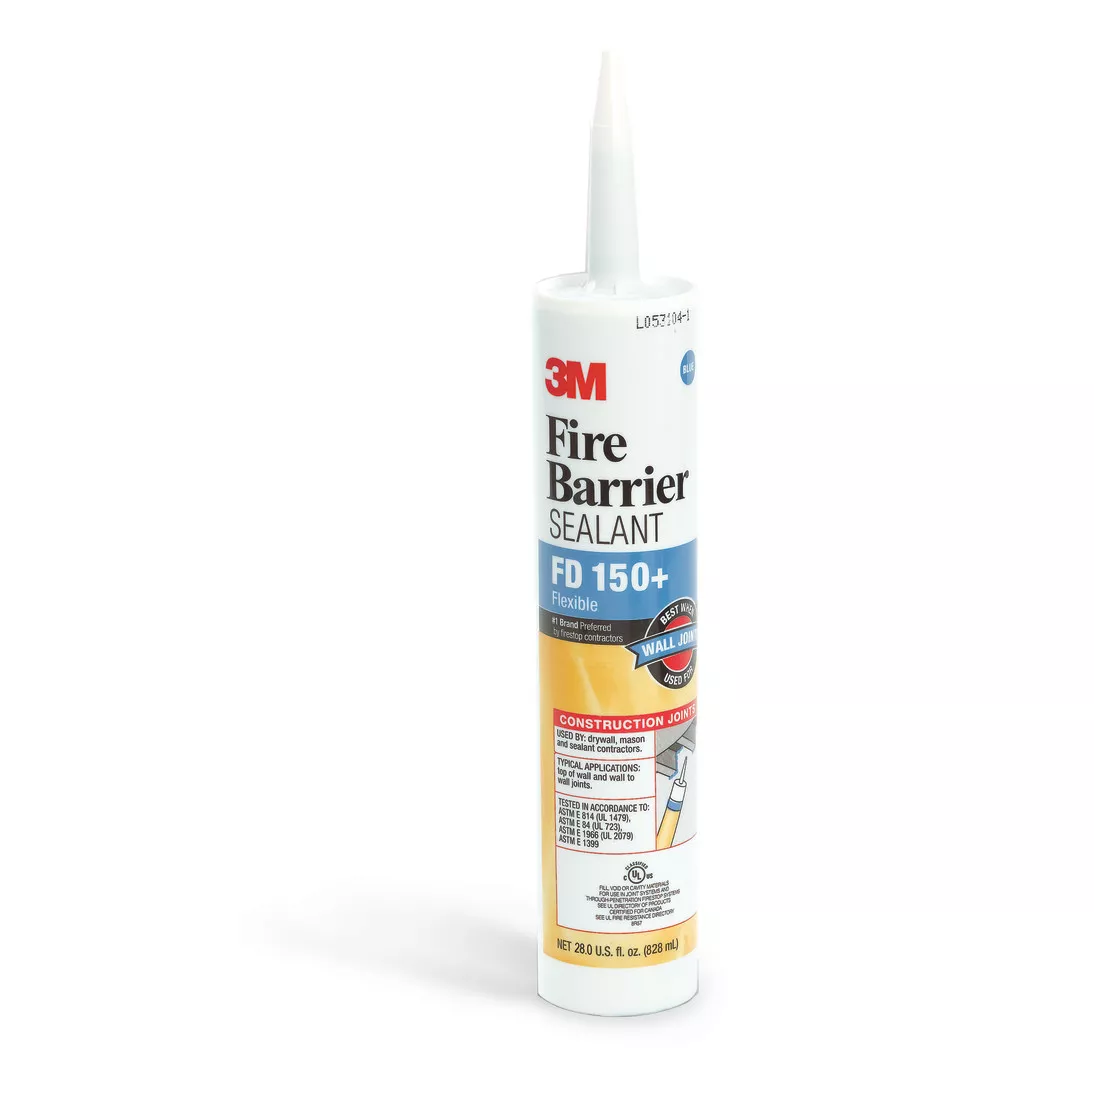 3M™ Fire Barrier Sealant IC 15WB+, Yellow, 10.1 fl oz Cartridge,
12/case, Restricted